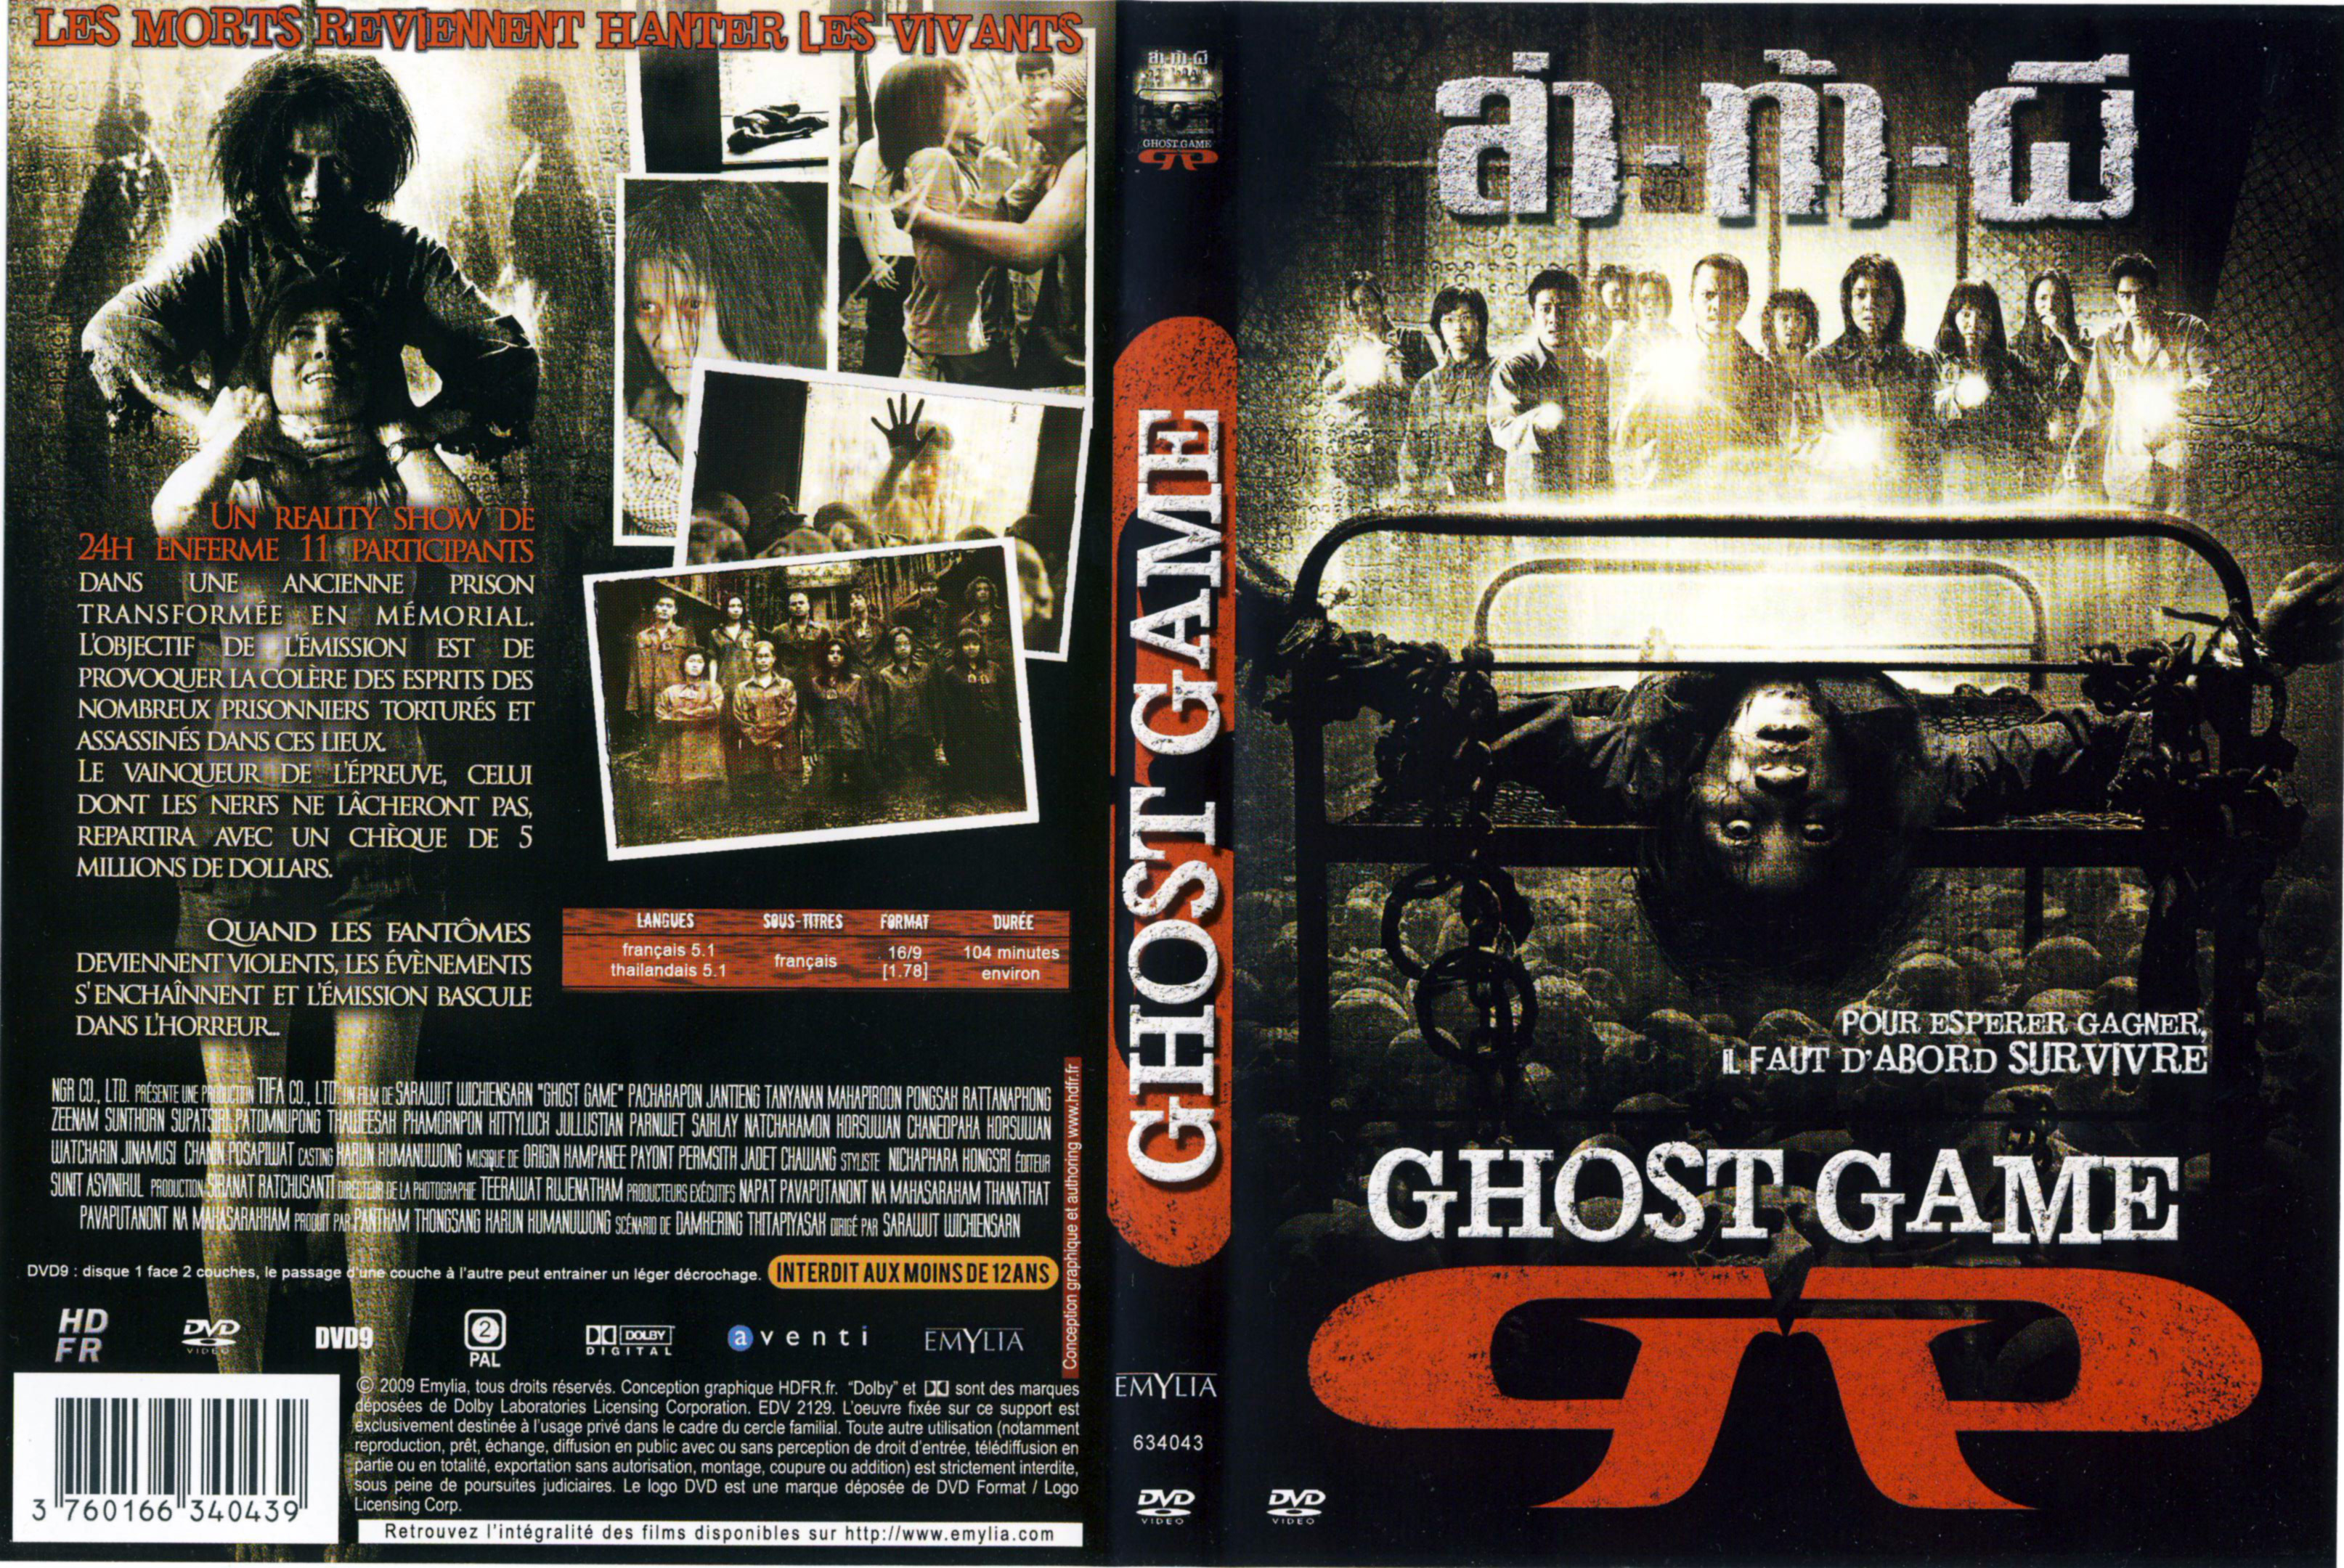 Jaquette DVD Ghost game